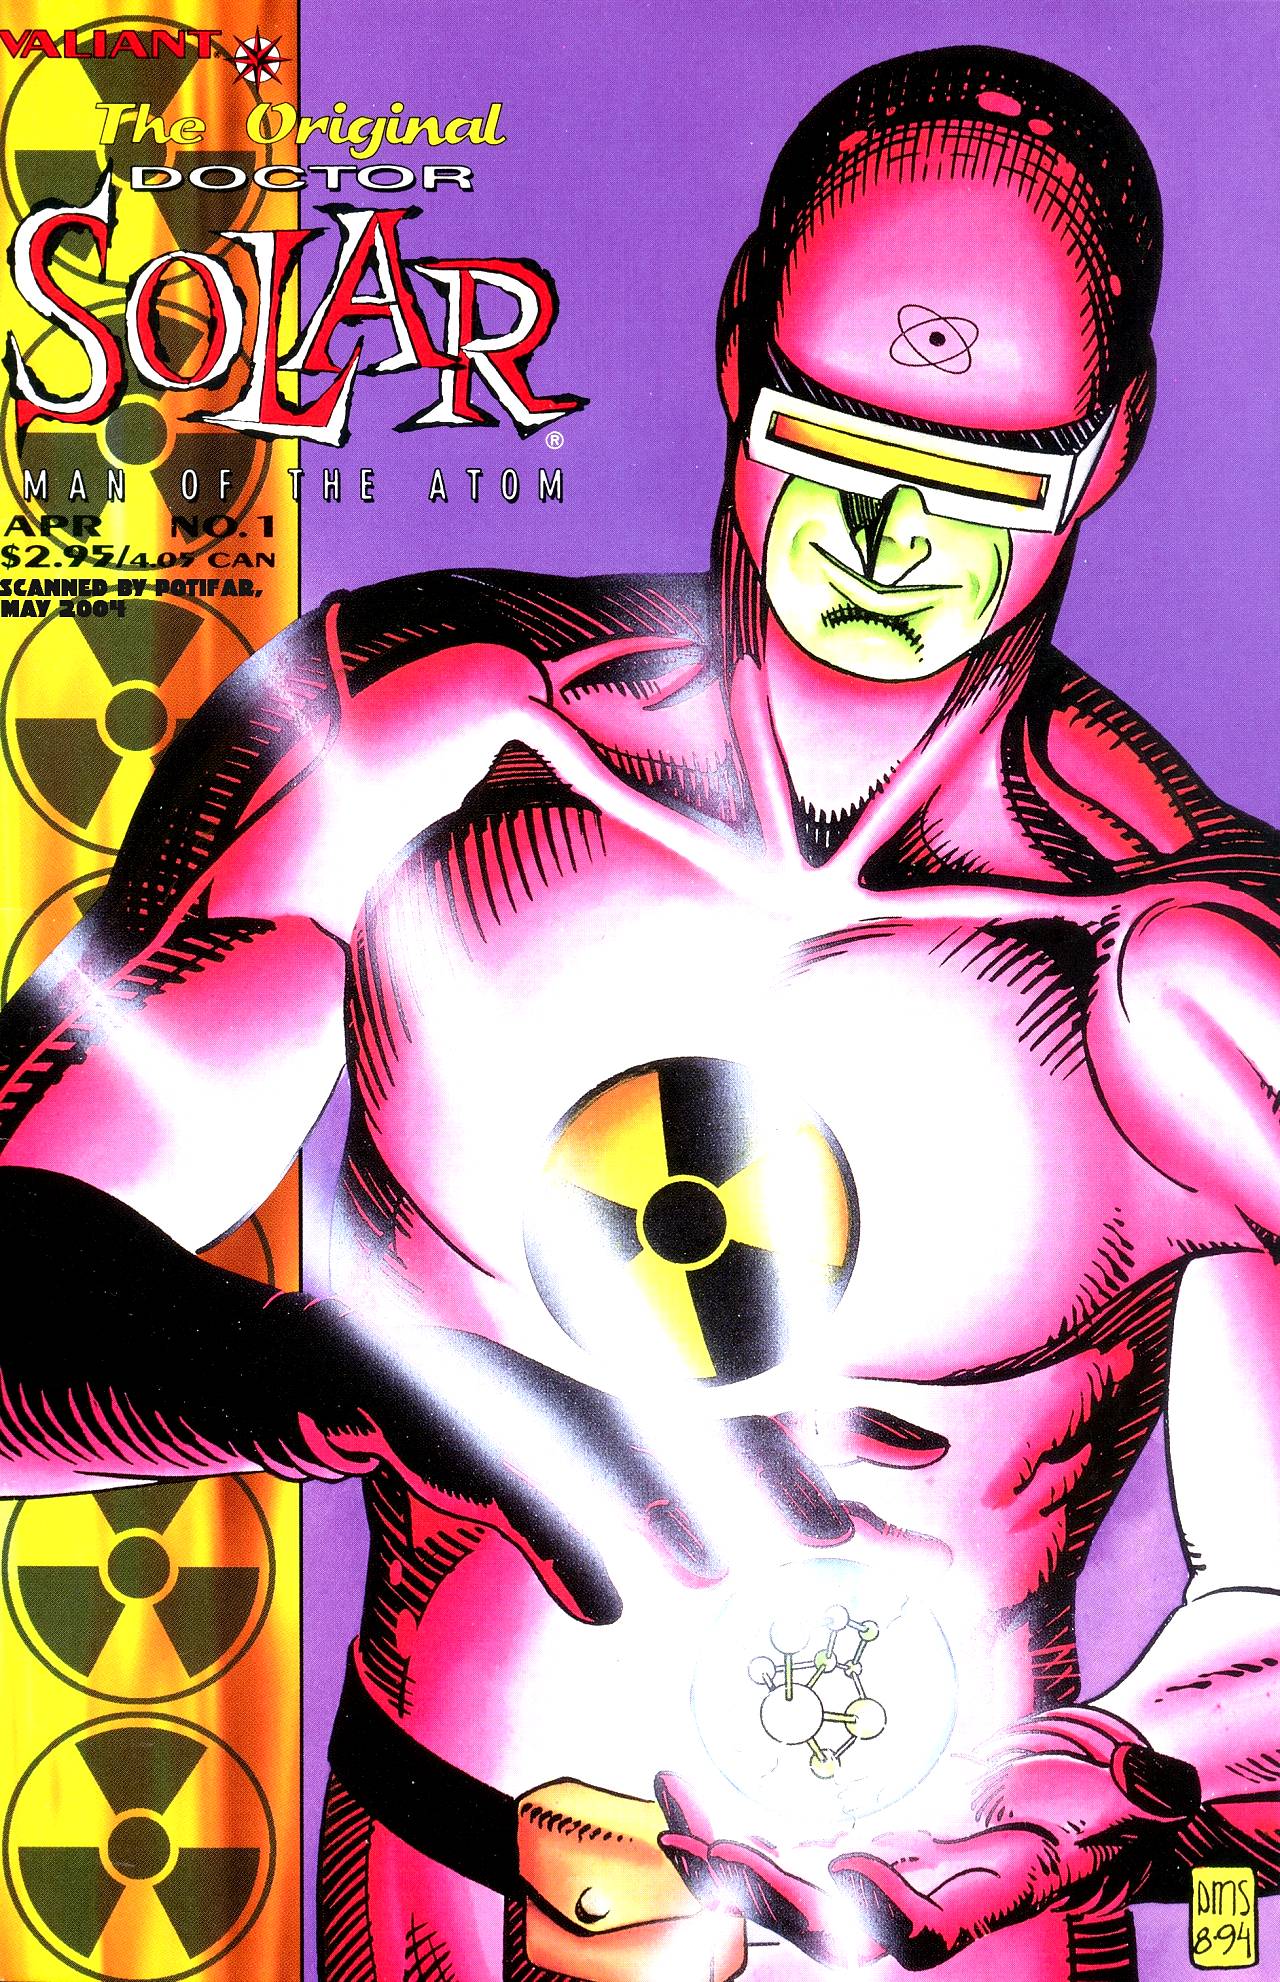 Read online The Original Doctor Solar, Man of the Atom comic -  Issue # Full - 1